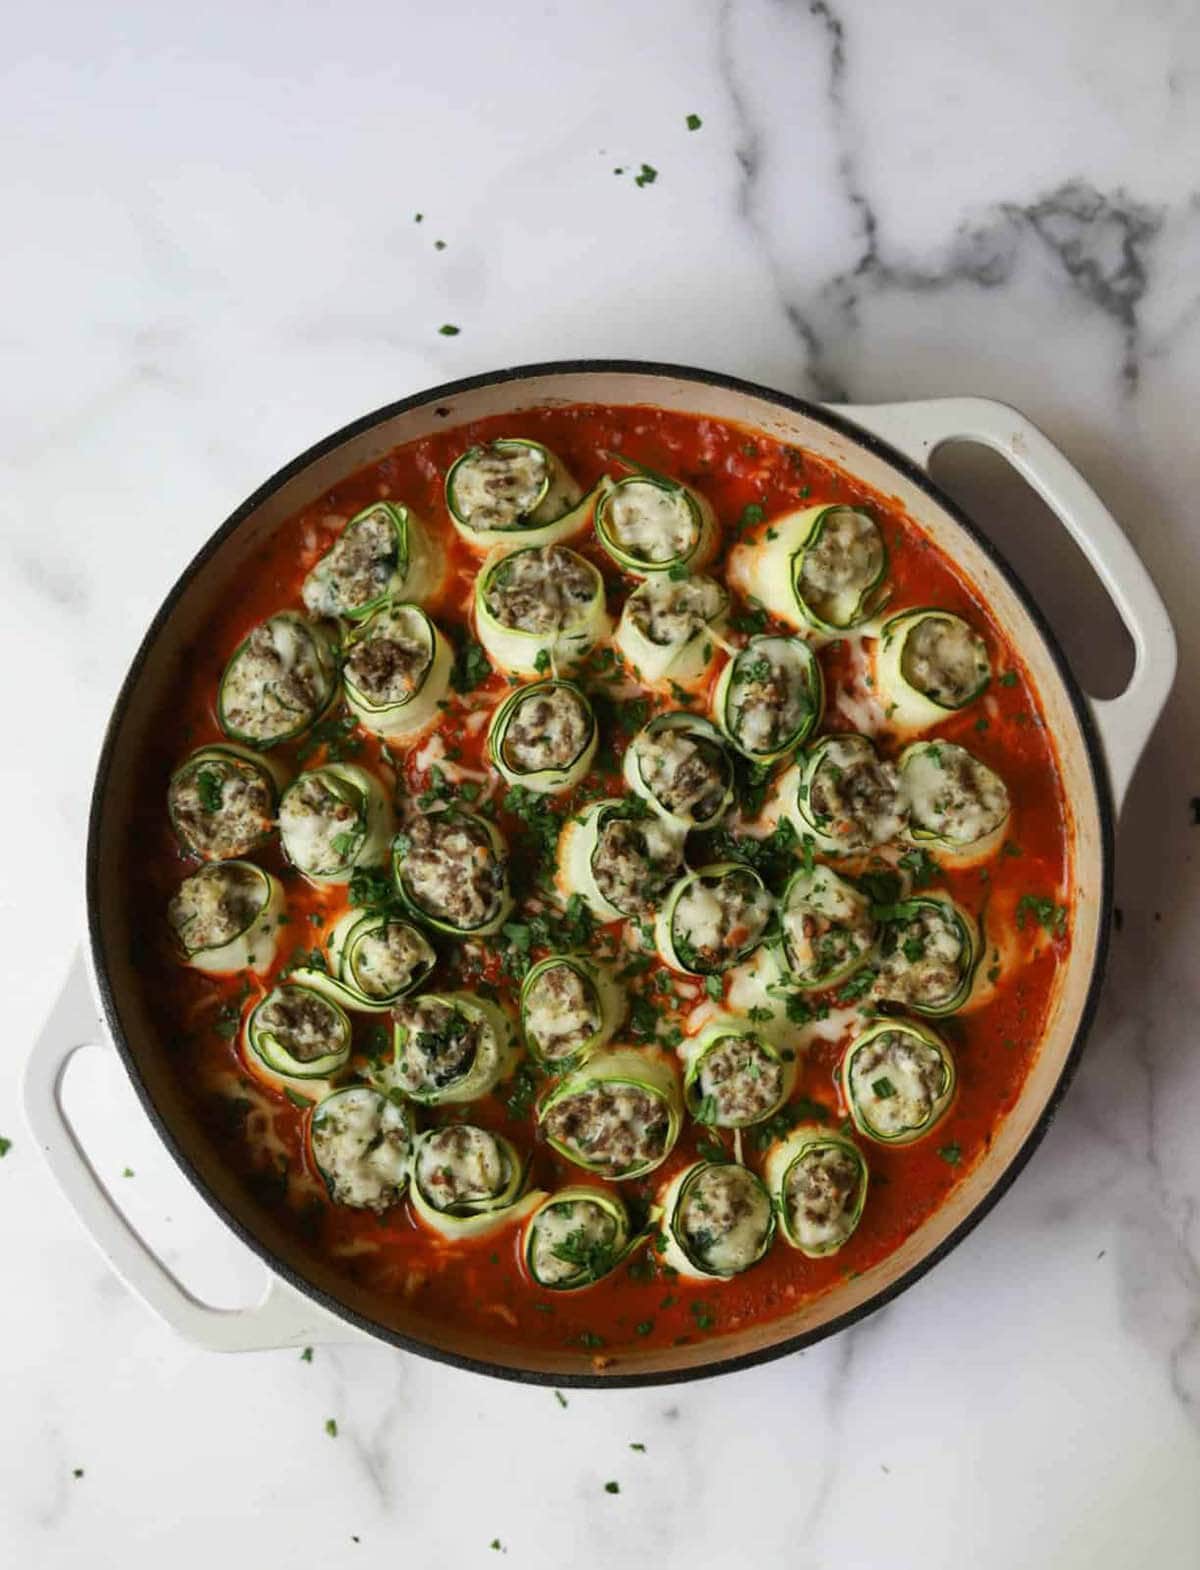 Zucchini rollups in baking dish with pasta sauce.